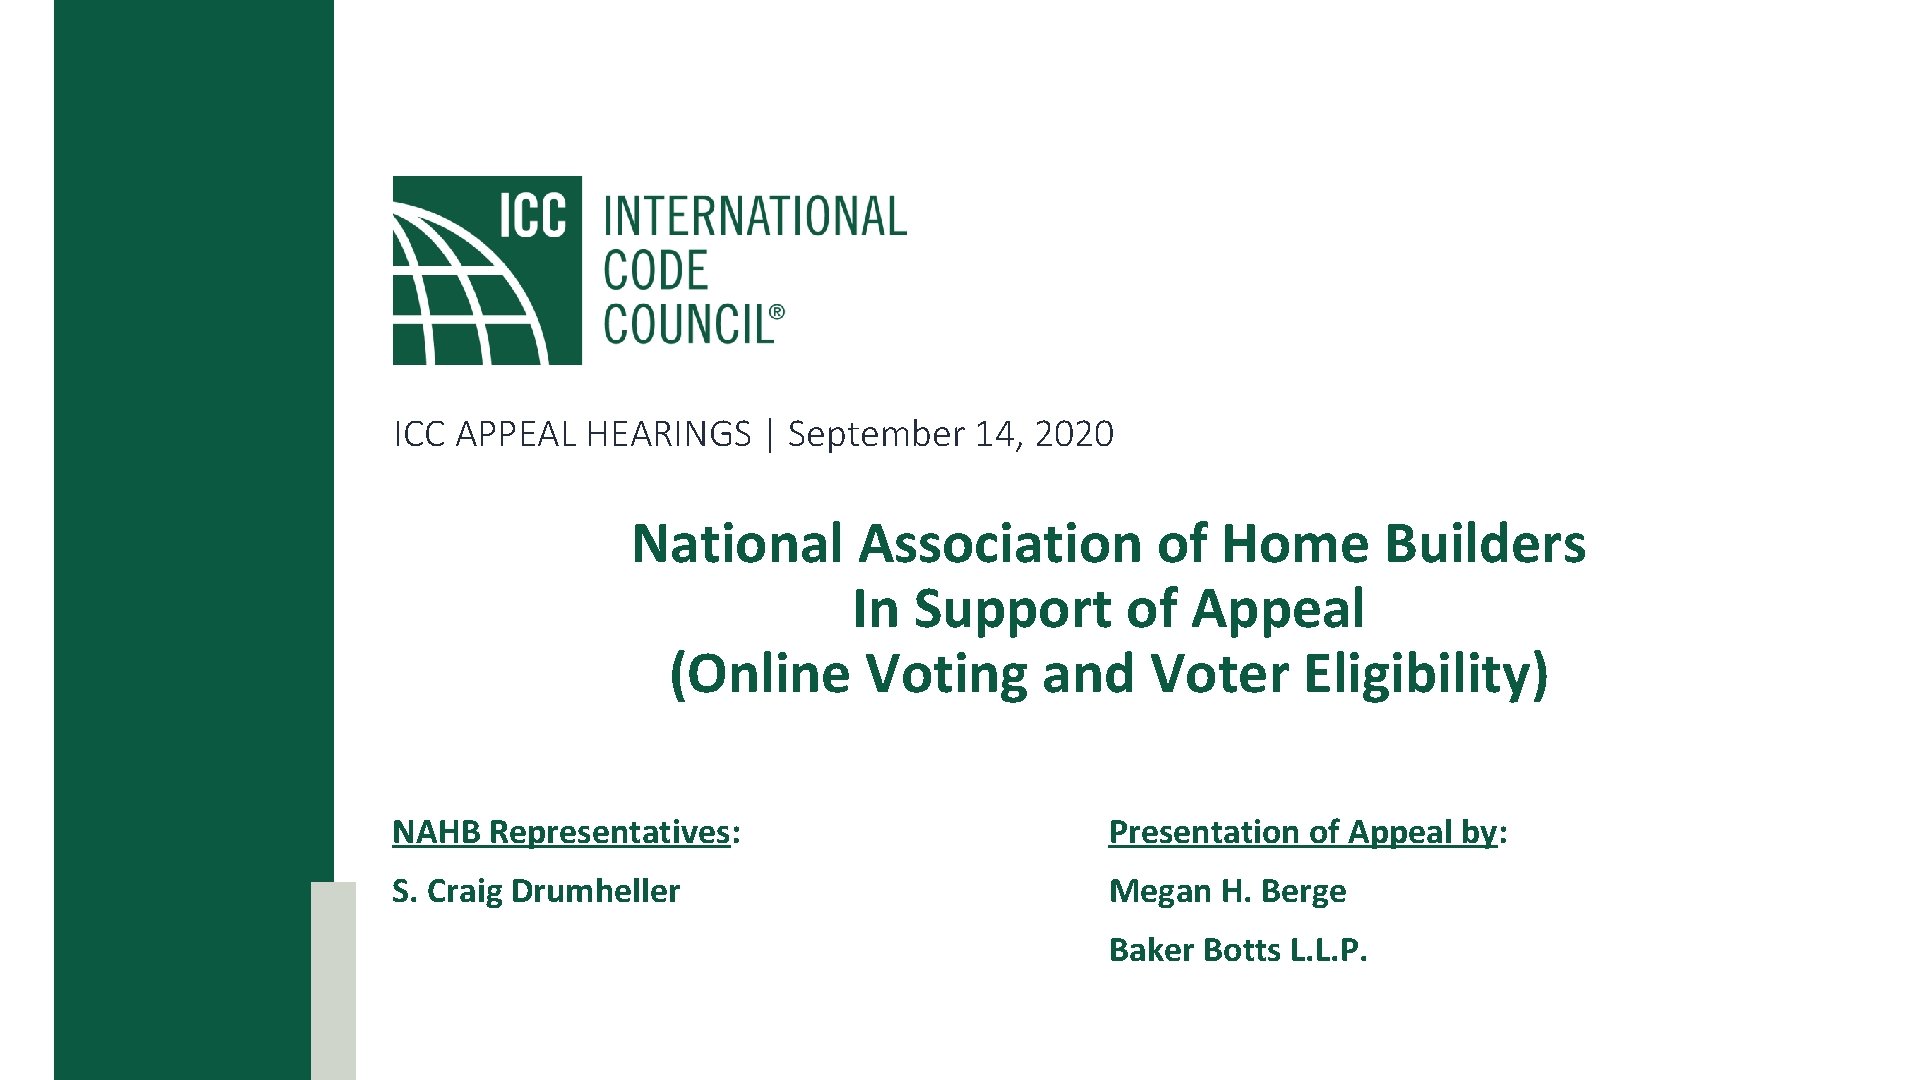 ICC APPEAL HEARINGS | September 14, 2020 National Association of Home Builders In Support